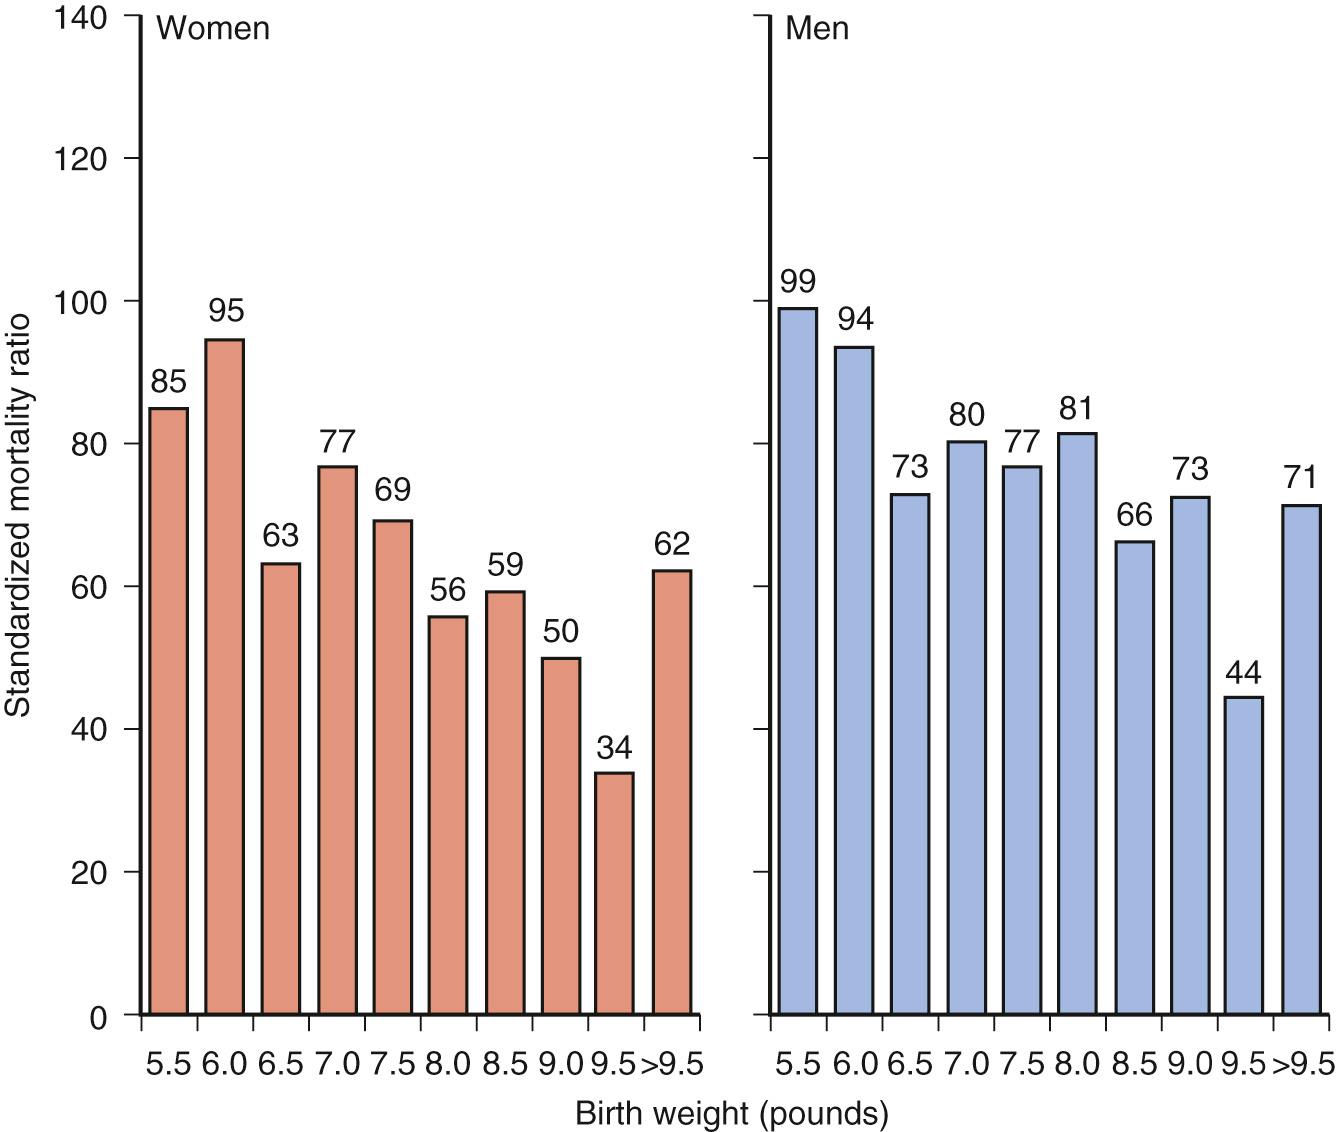 Fig. 16.2, Standardized mortality ratio based on birth weight in pounds in women and men from studies of Barker and Sultan.